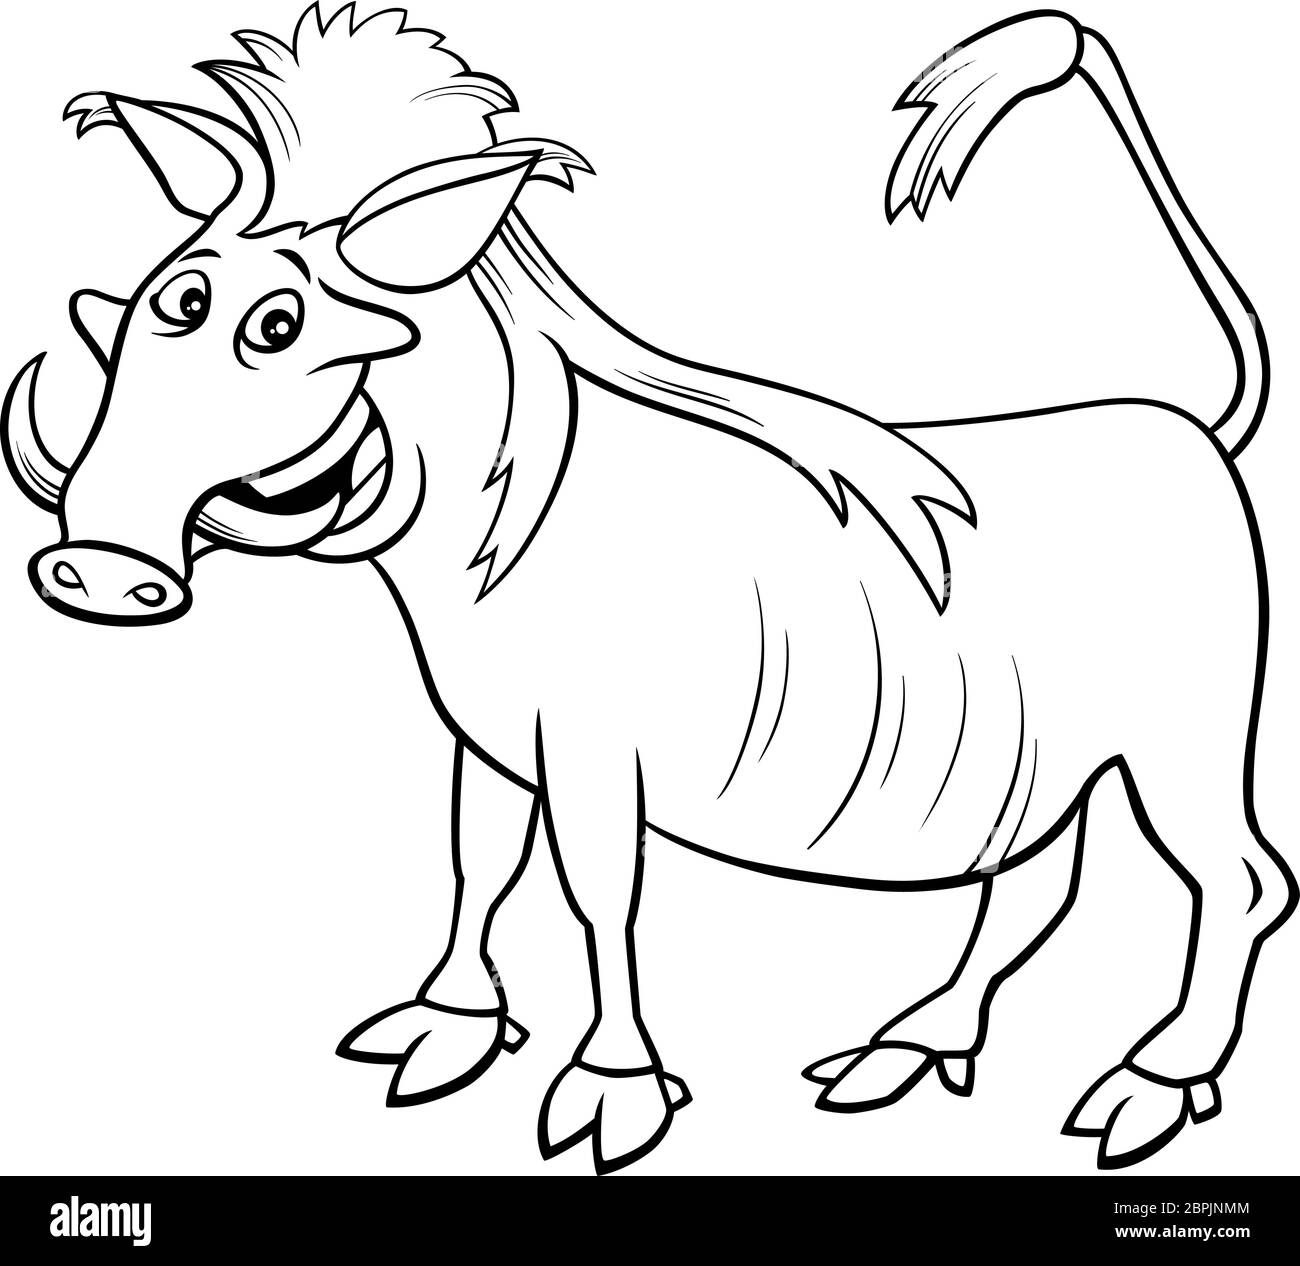 Black and White Cartoon Illustration of Funny Warthog Wild African Animal Character Coloring Book Page Stock Vector